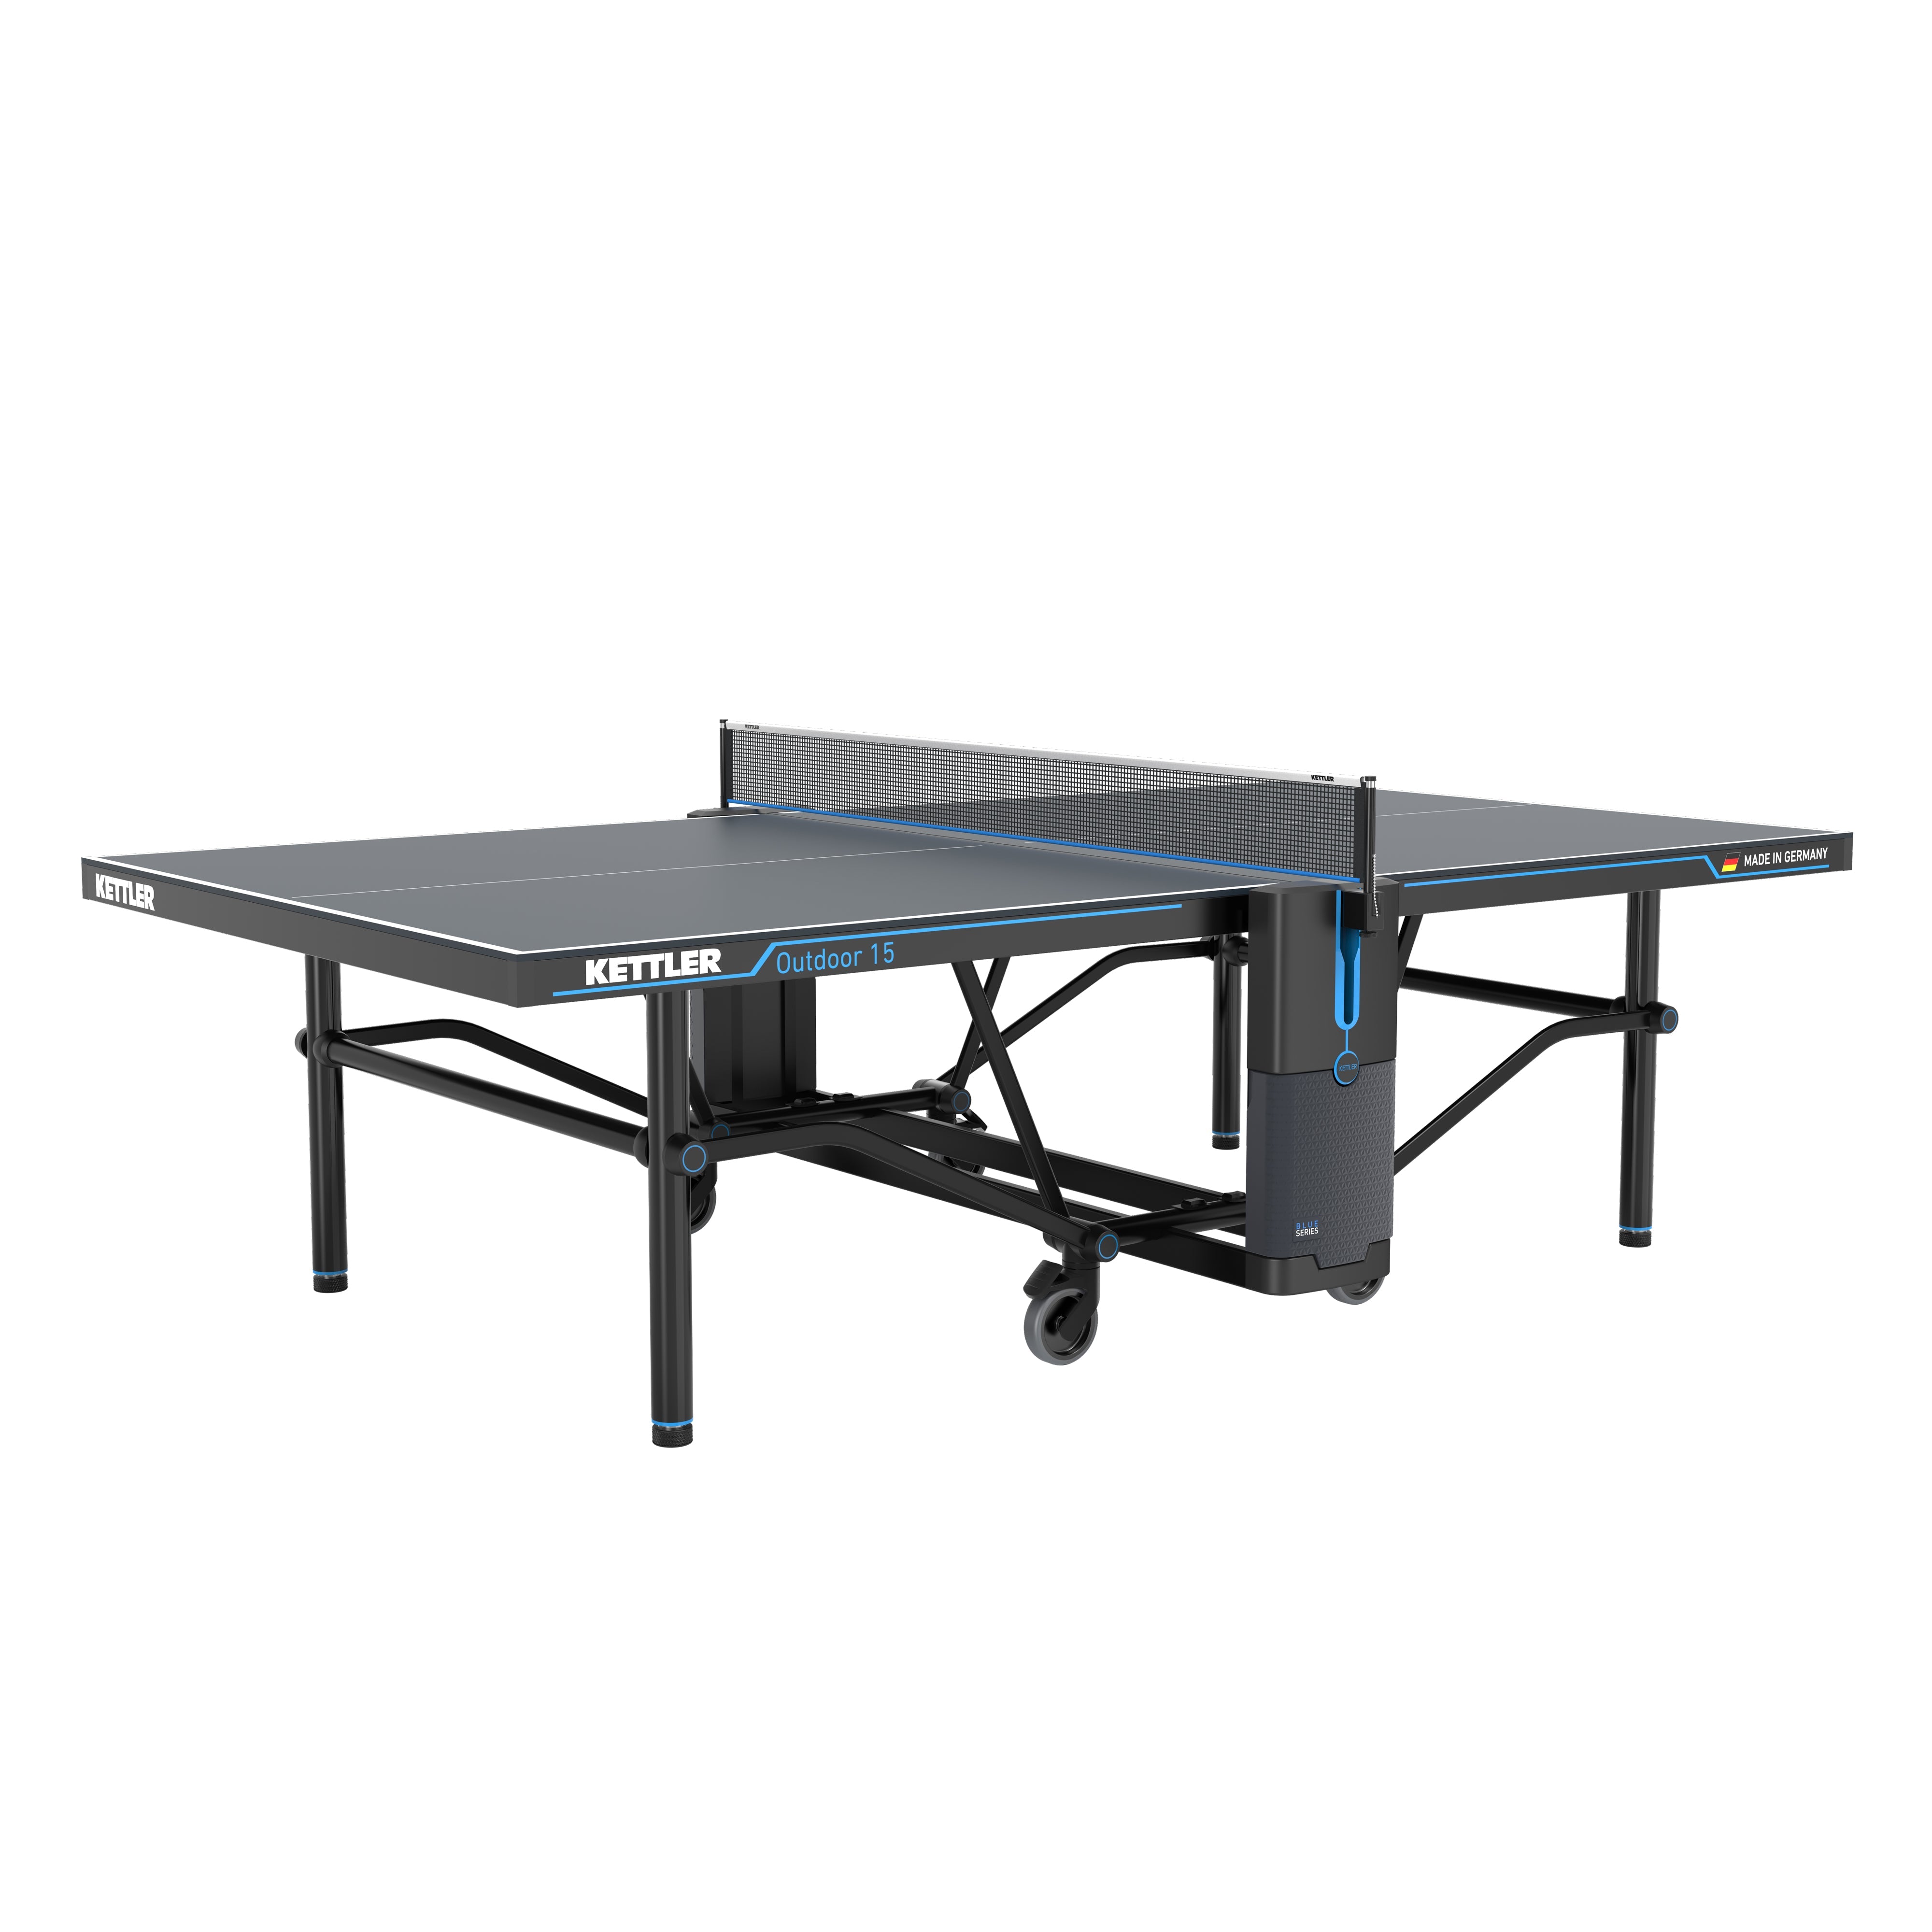 Made in Germany Table Tennis Table in playback position 